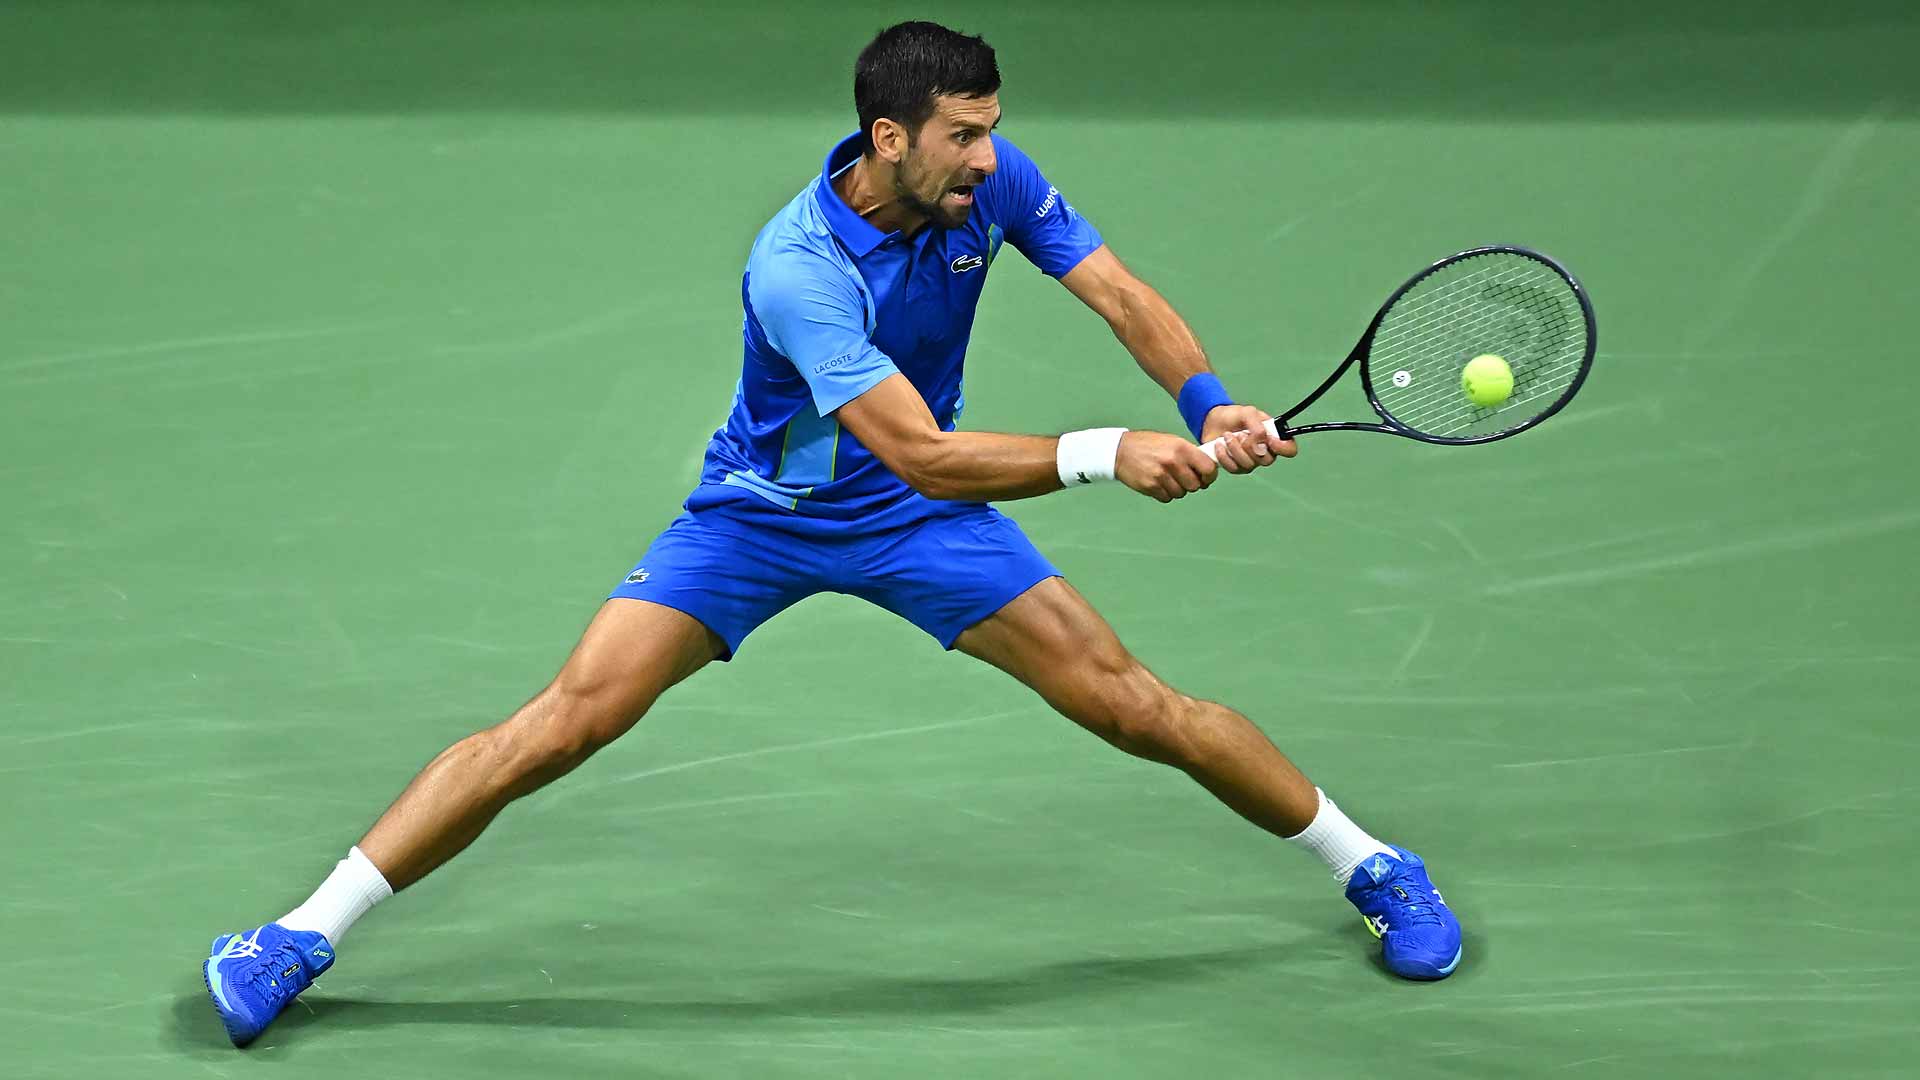 Novak Djokovic has the record for the most tiebreaks won in a